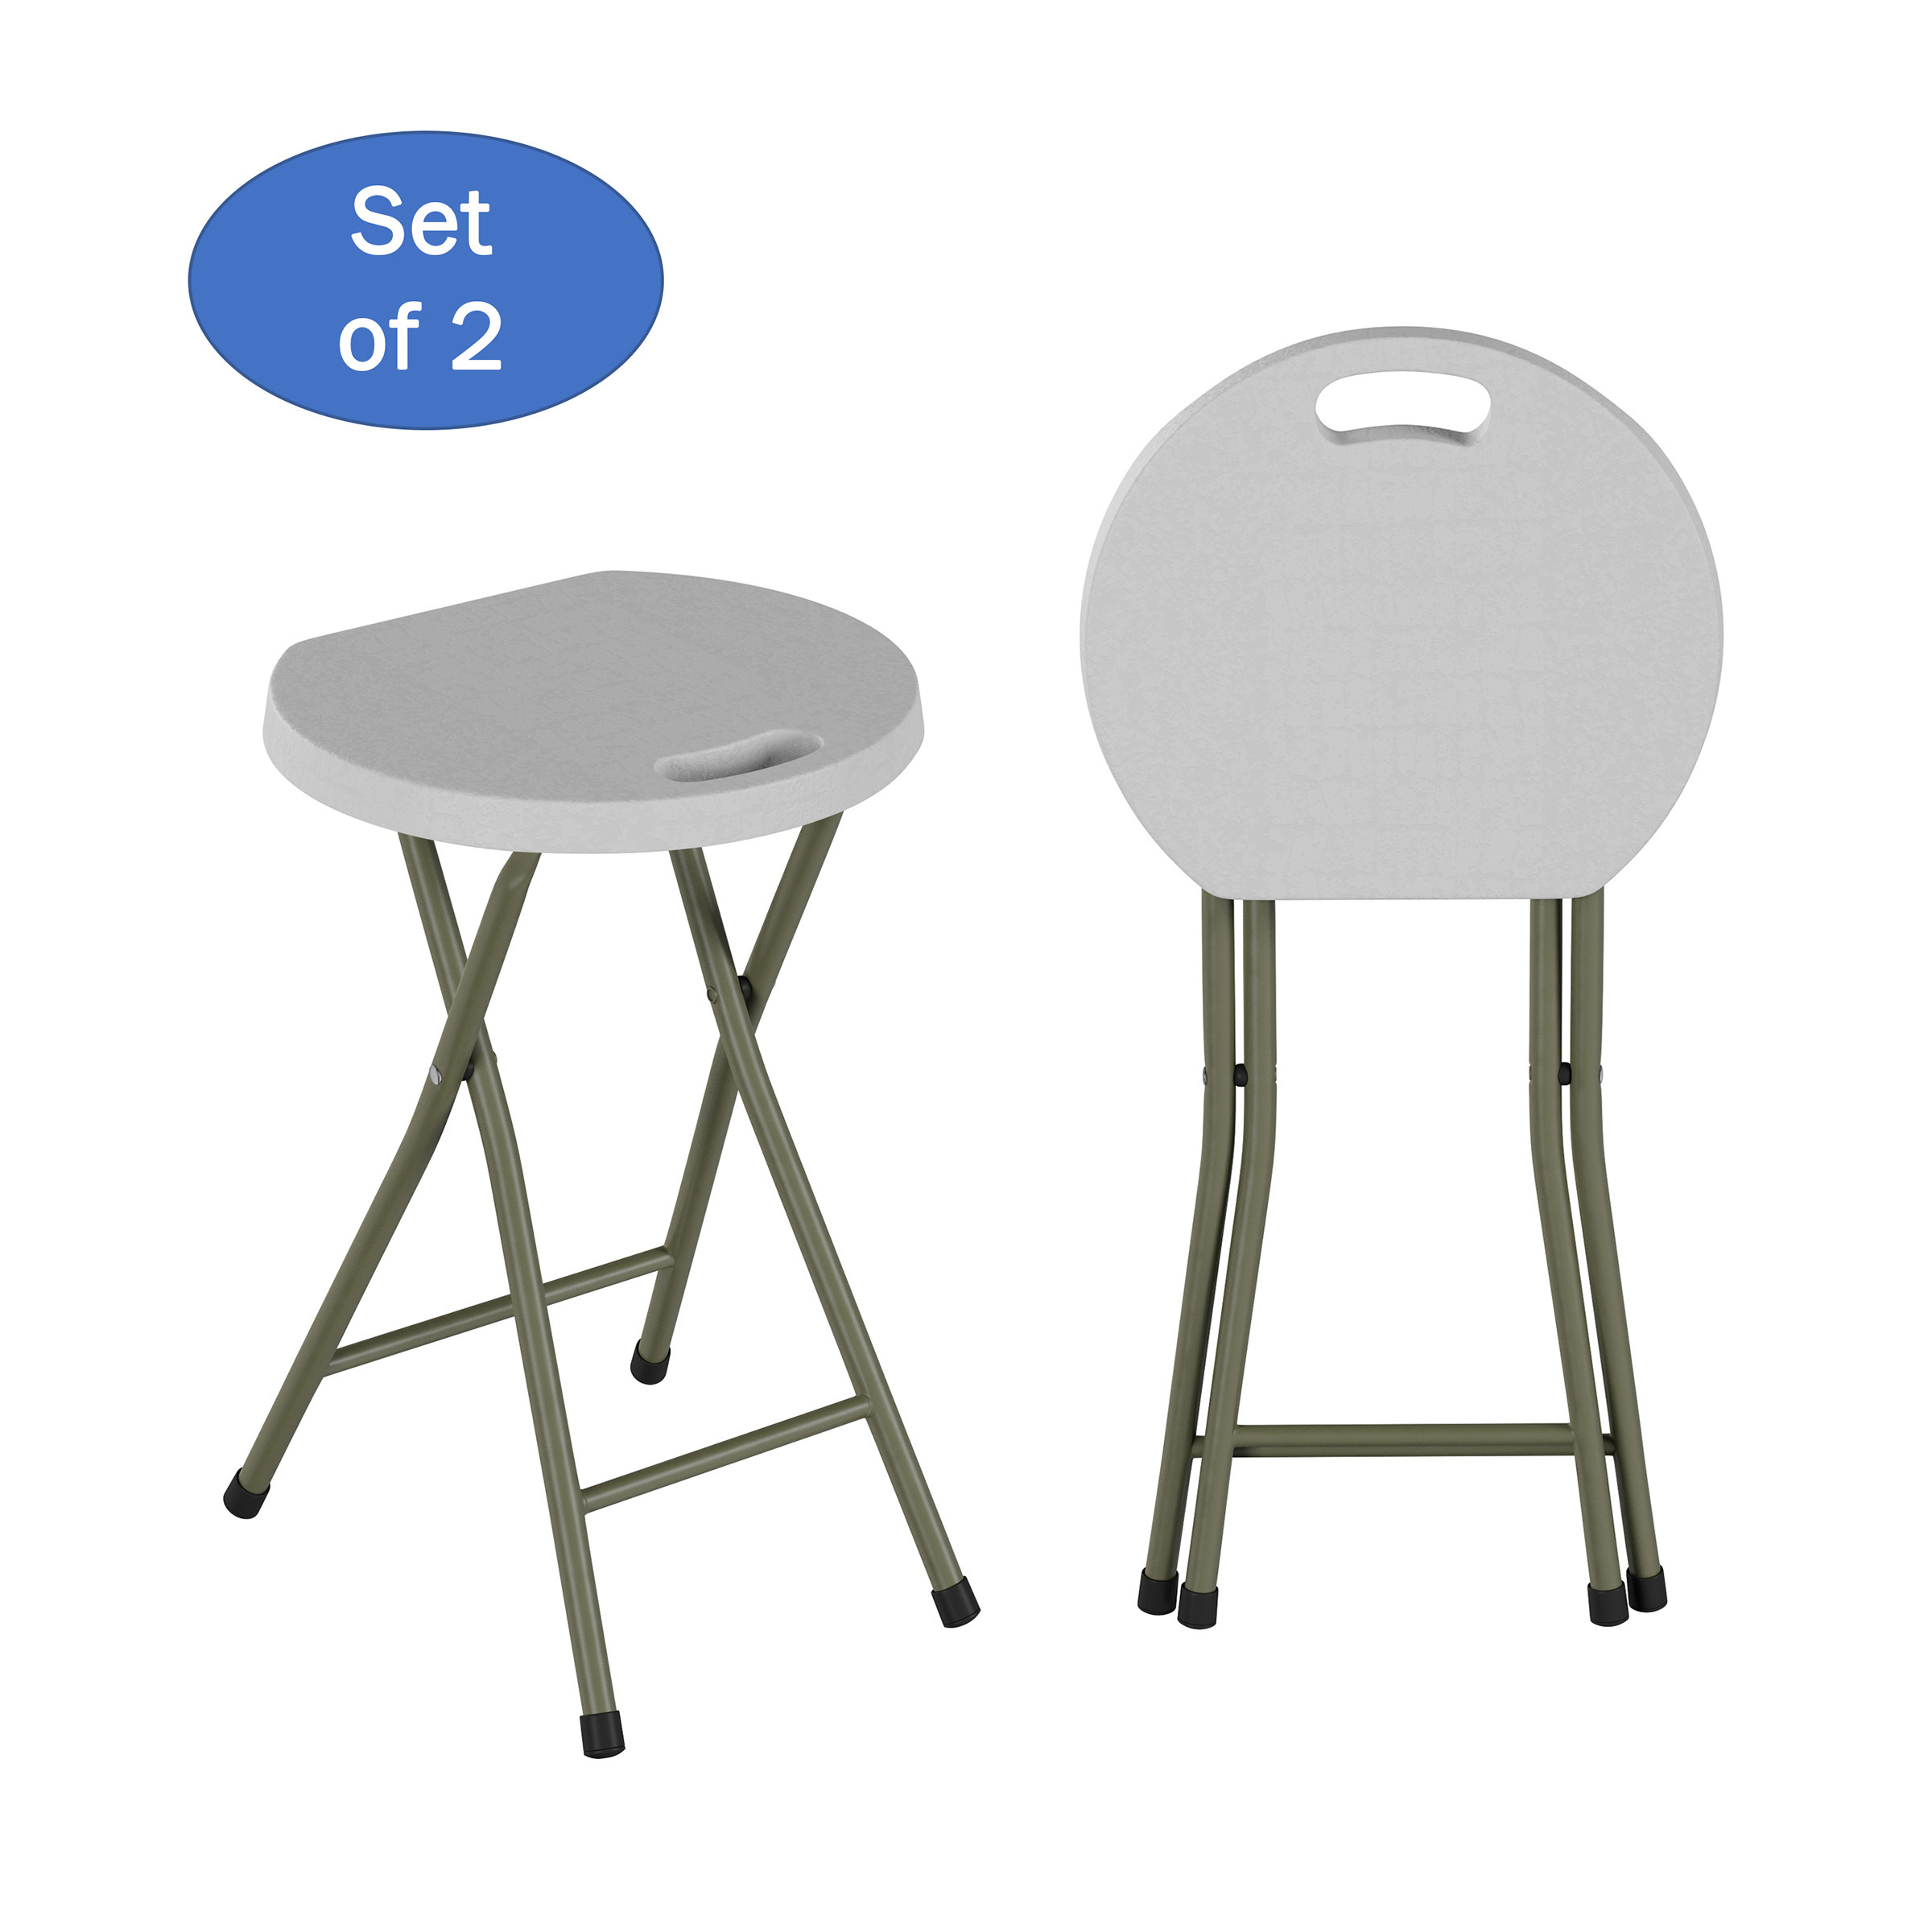 18-Inch Folding Stool- Set Of 2 Visitor Guest Seating Easy Storage